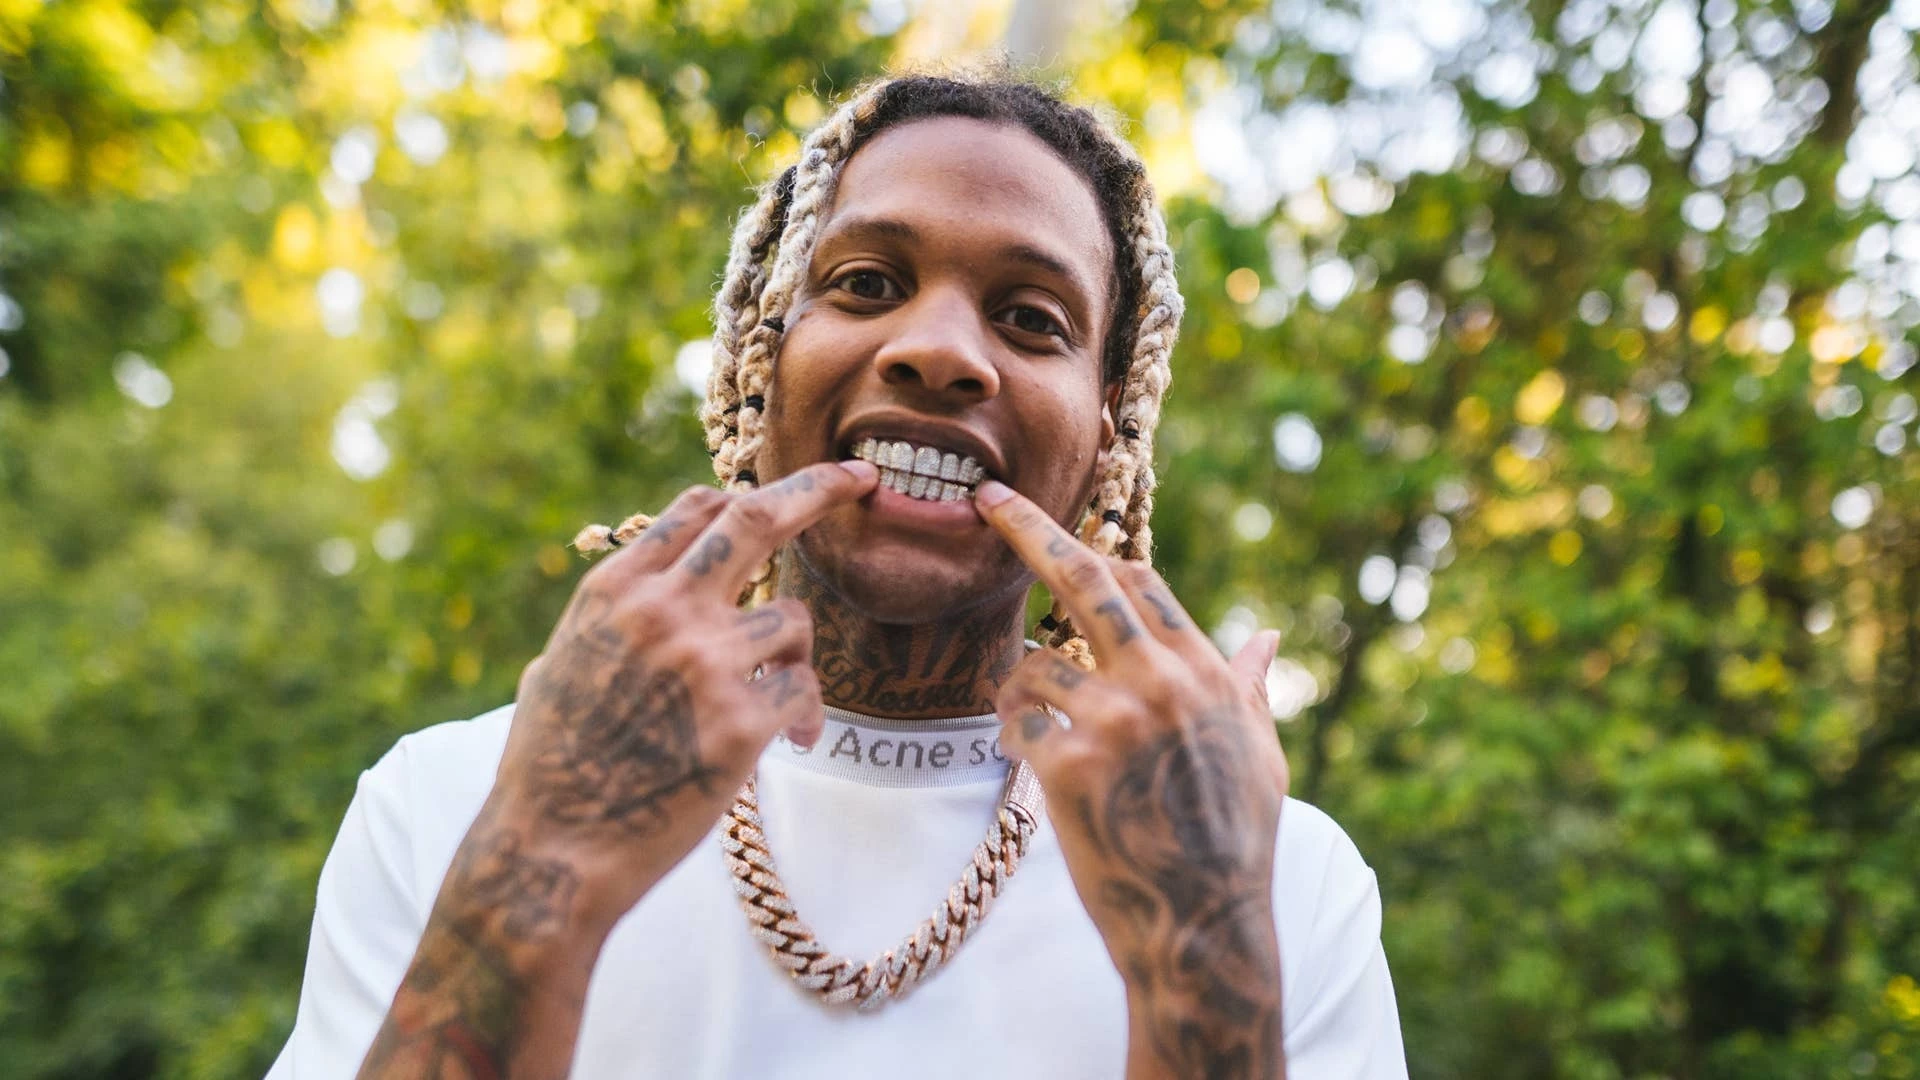 Lil Durk Business investments